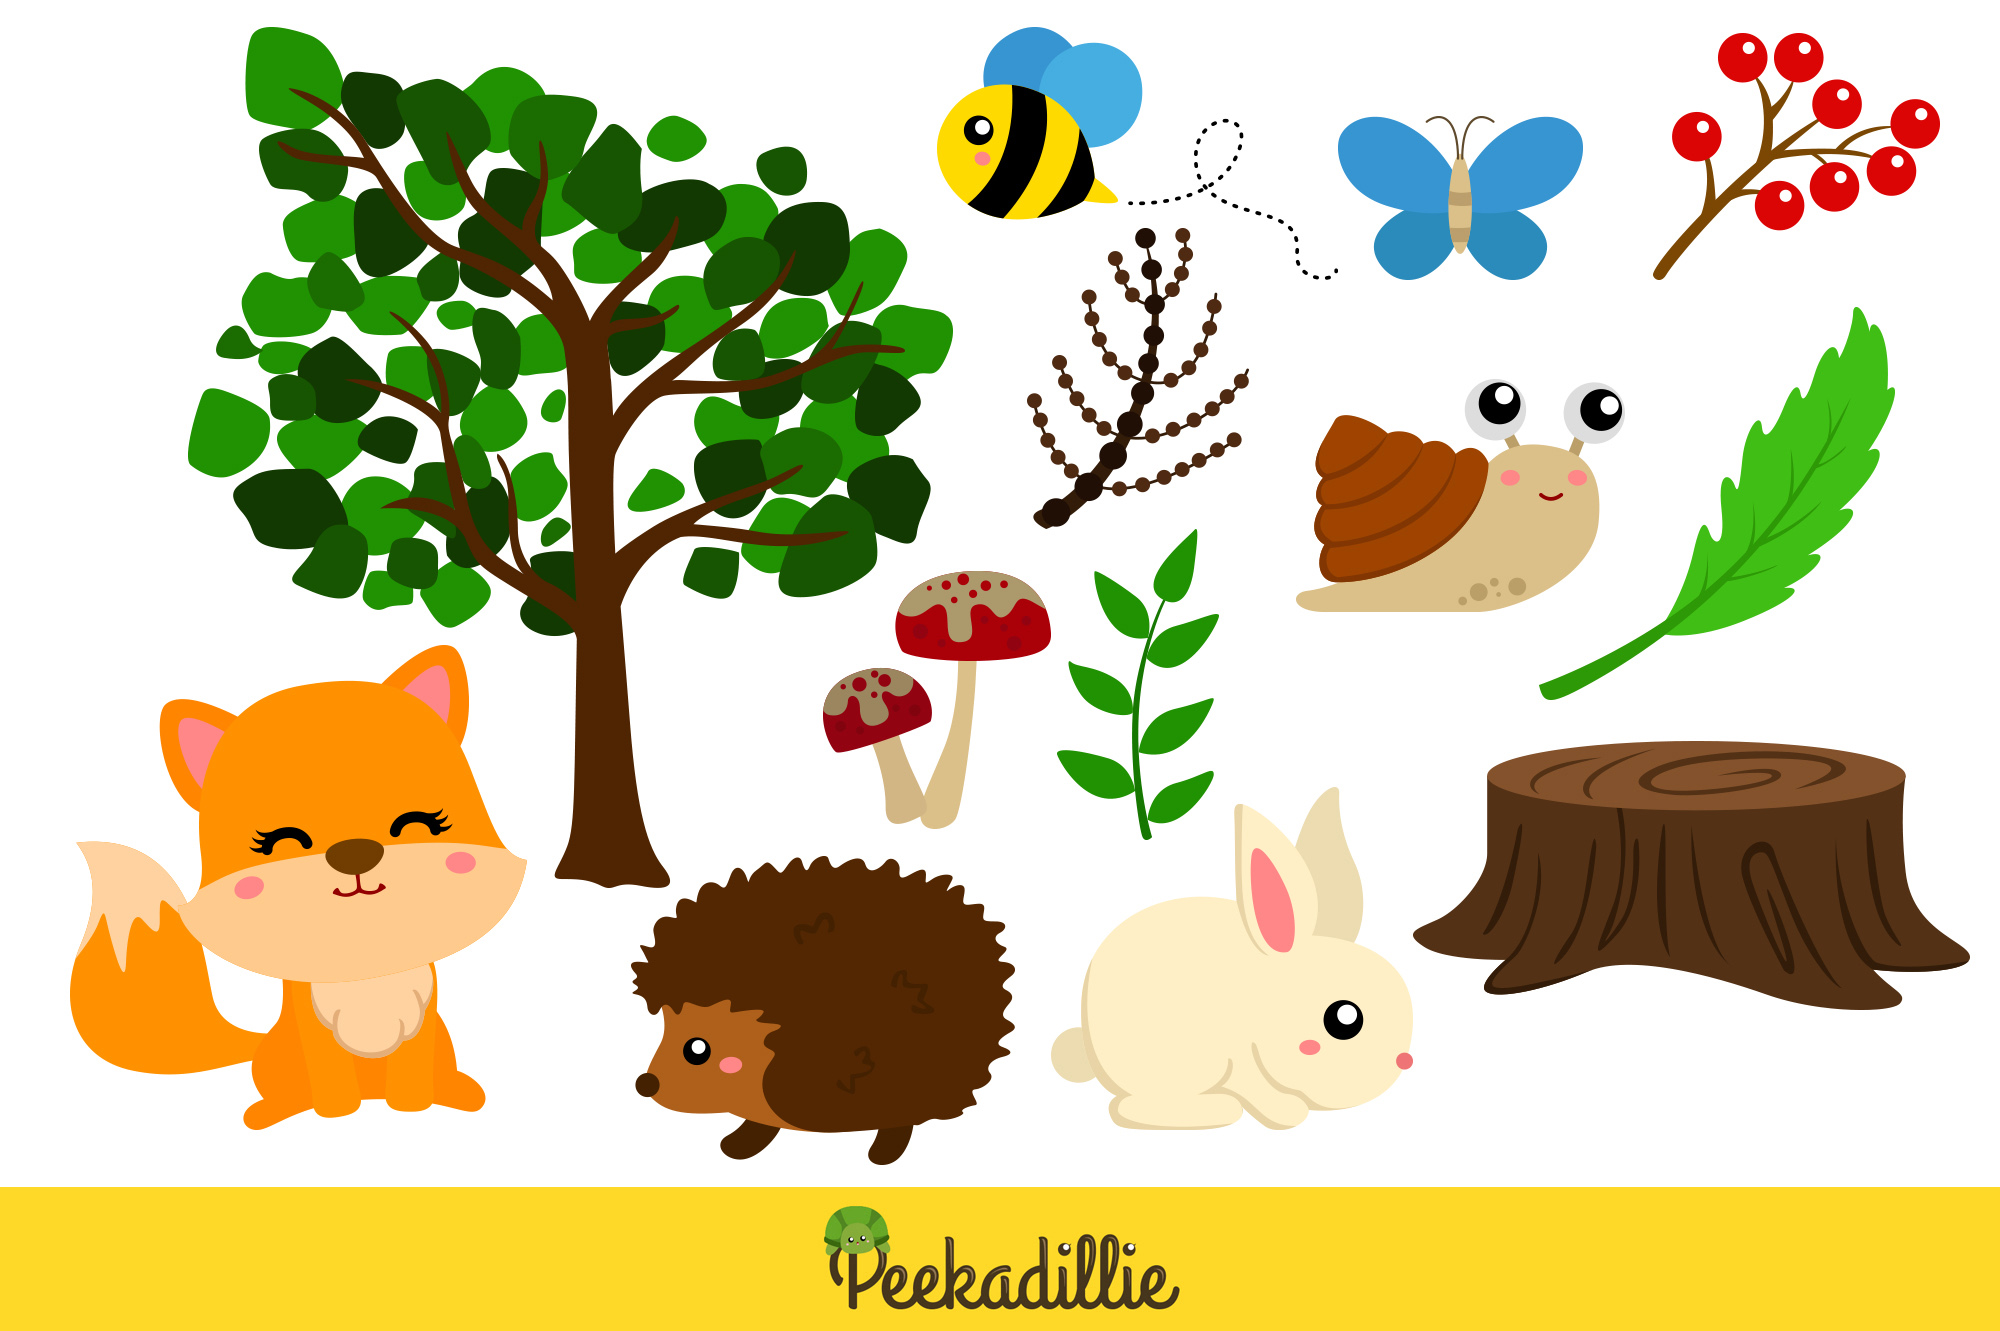 Group of different animals and plants on a white background.